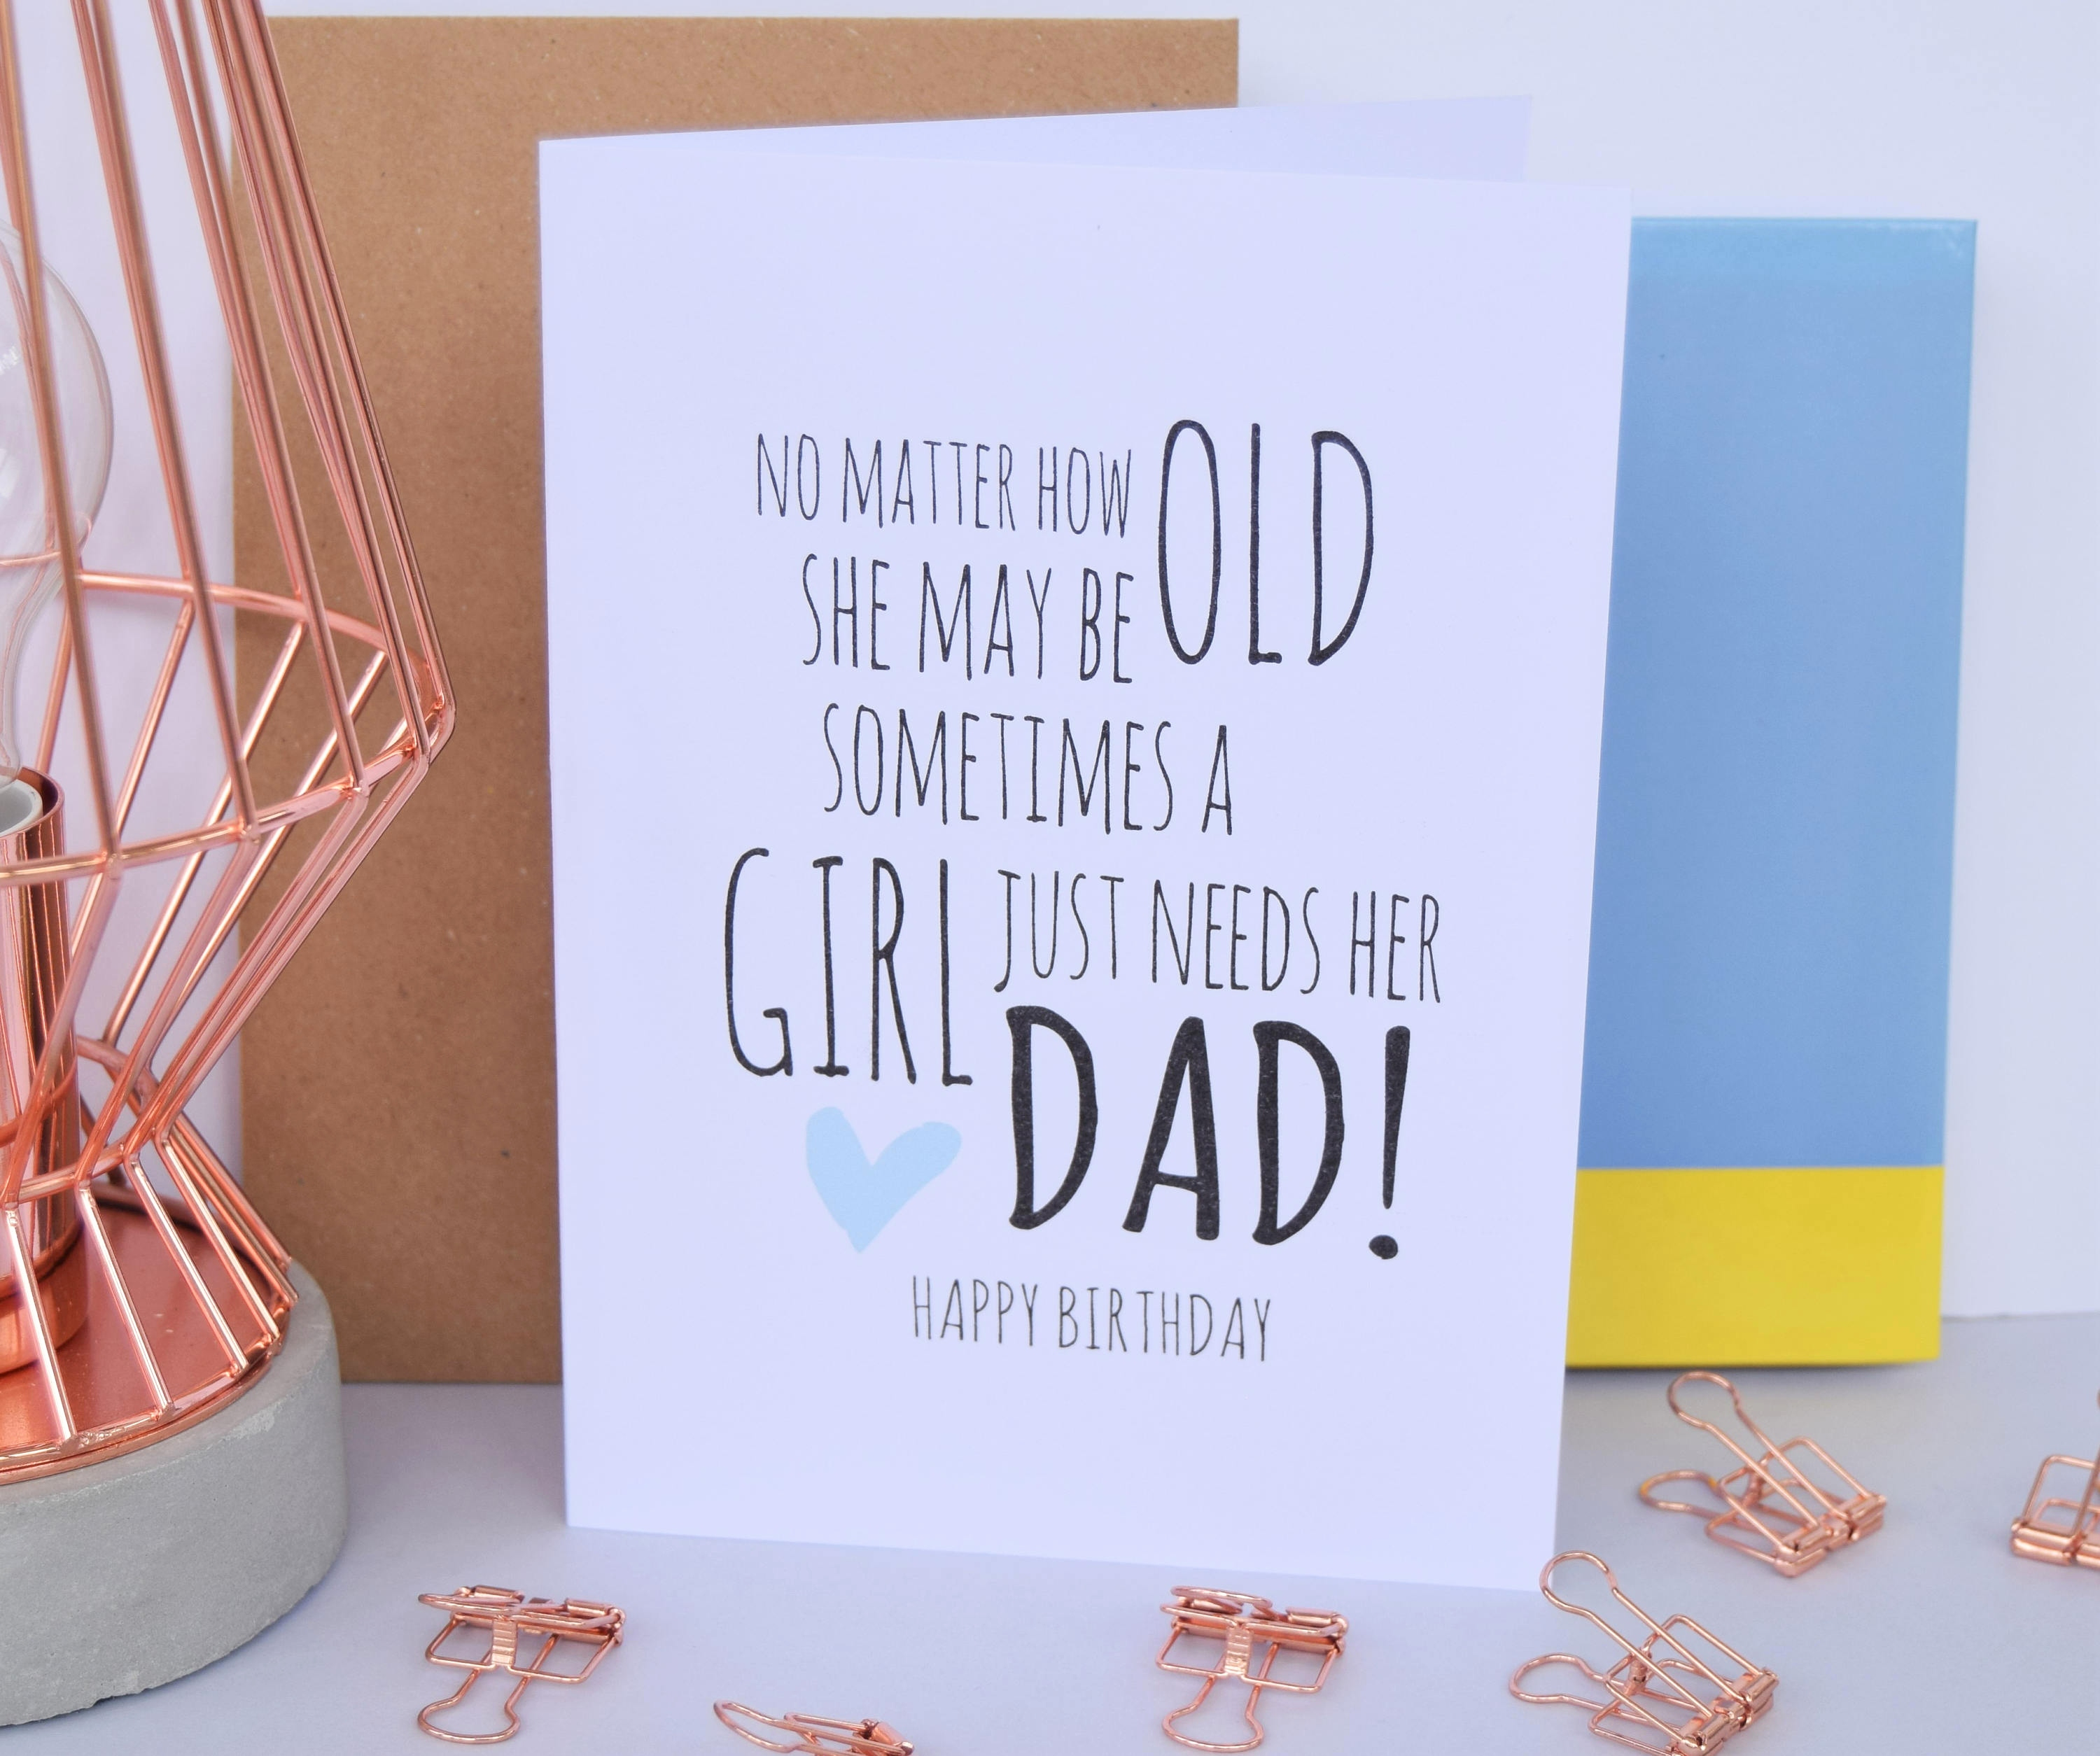 Birthday Card Ideas For Dad From Daughter 98 Good Birthday Card Ideas For Dad Good Birthday Cards For Dad